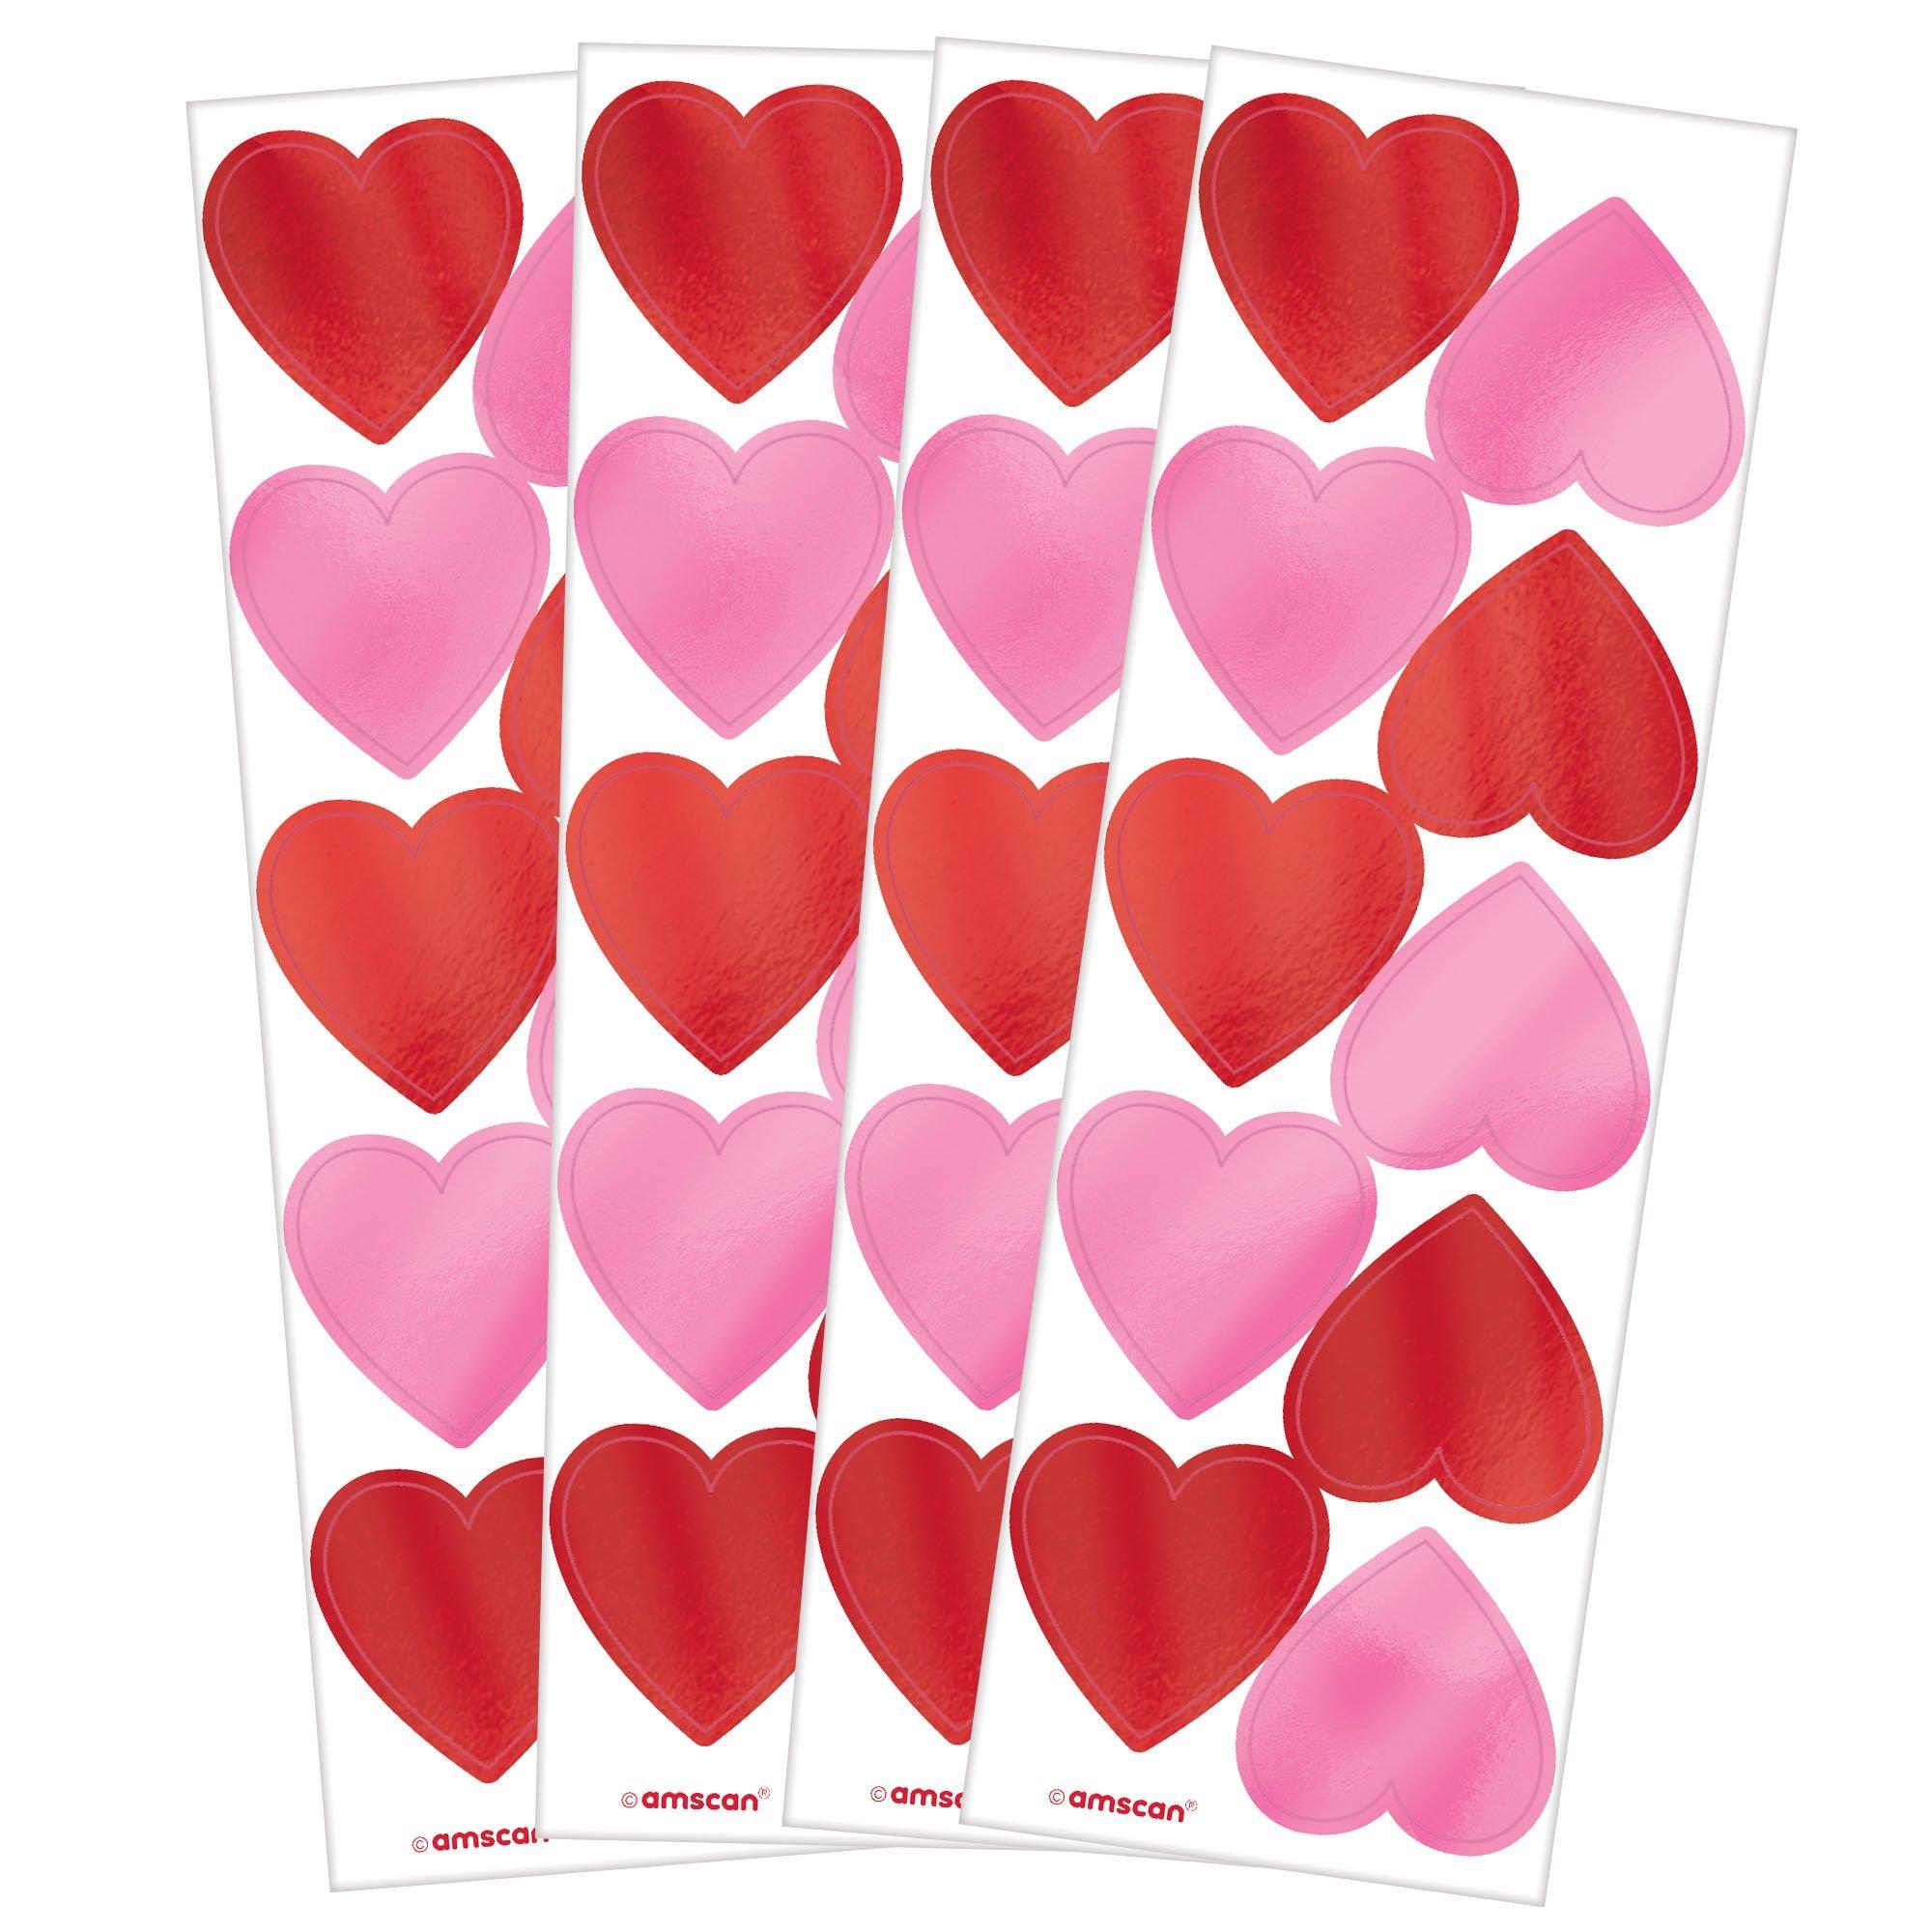 Foil Hearts Cards - Our Kid Things